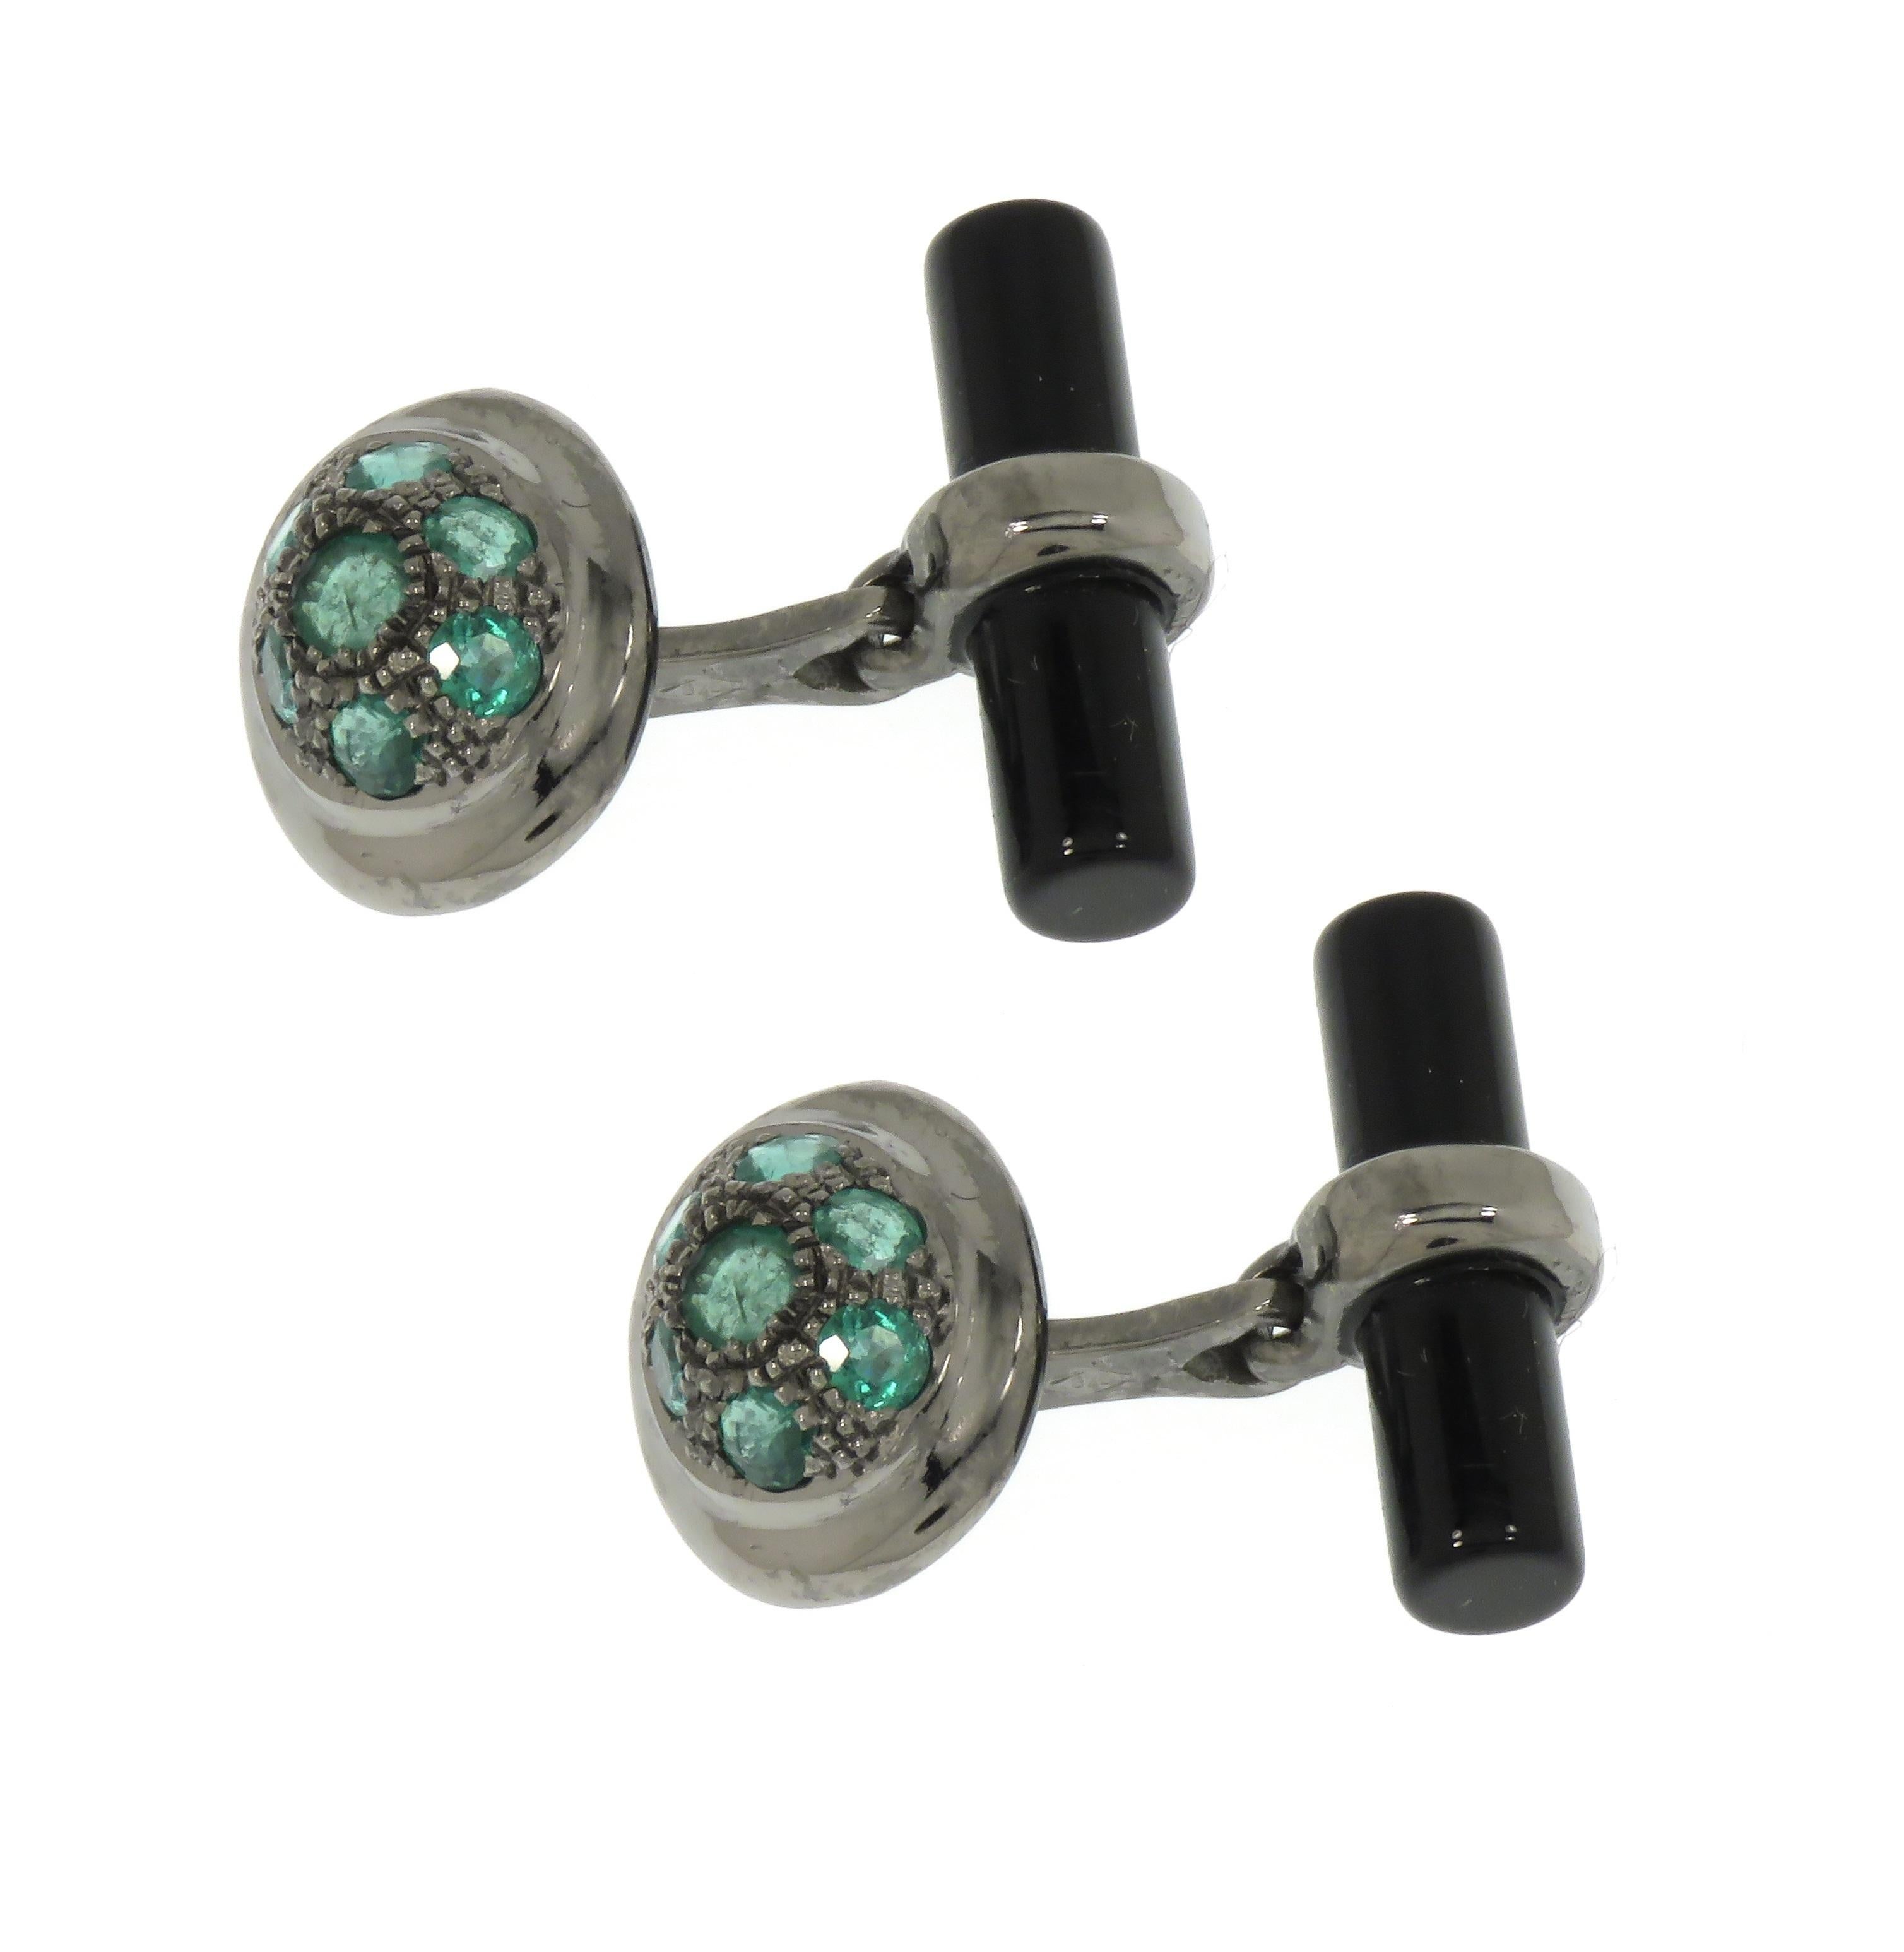 Beautiful cufflinks crafted in 9 karat white gold  black rhodium plating featuring 14 natural round cut green emeralds and two natural onyx bars. Oval front dimension is : 15x12 mm / 0.590x0.472 inches, back bar dimension is; 20x5 mm / 0.787x0.196